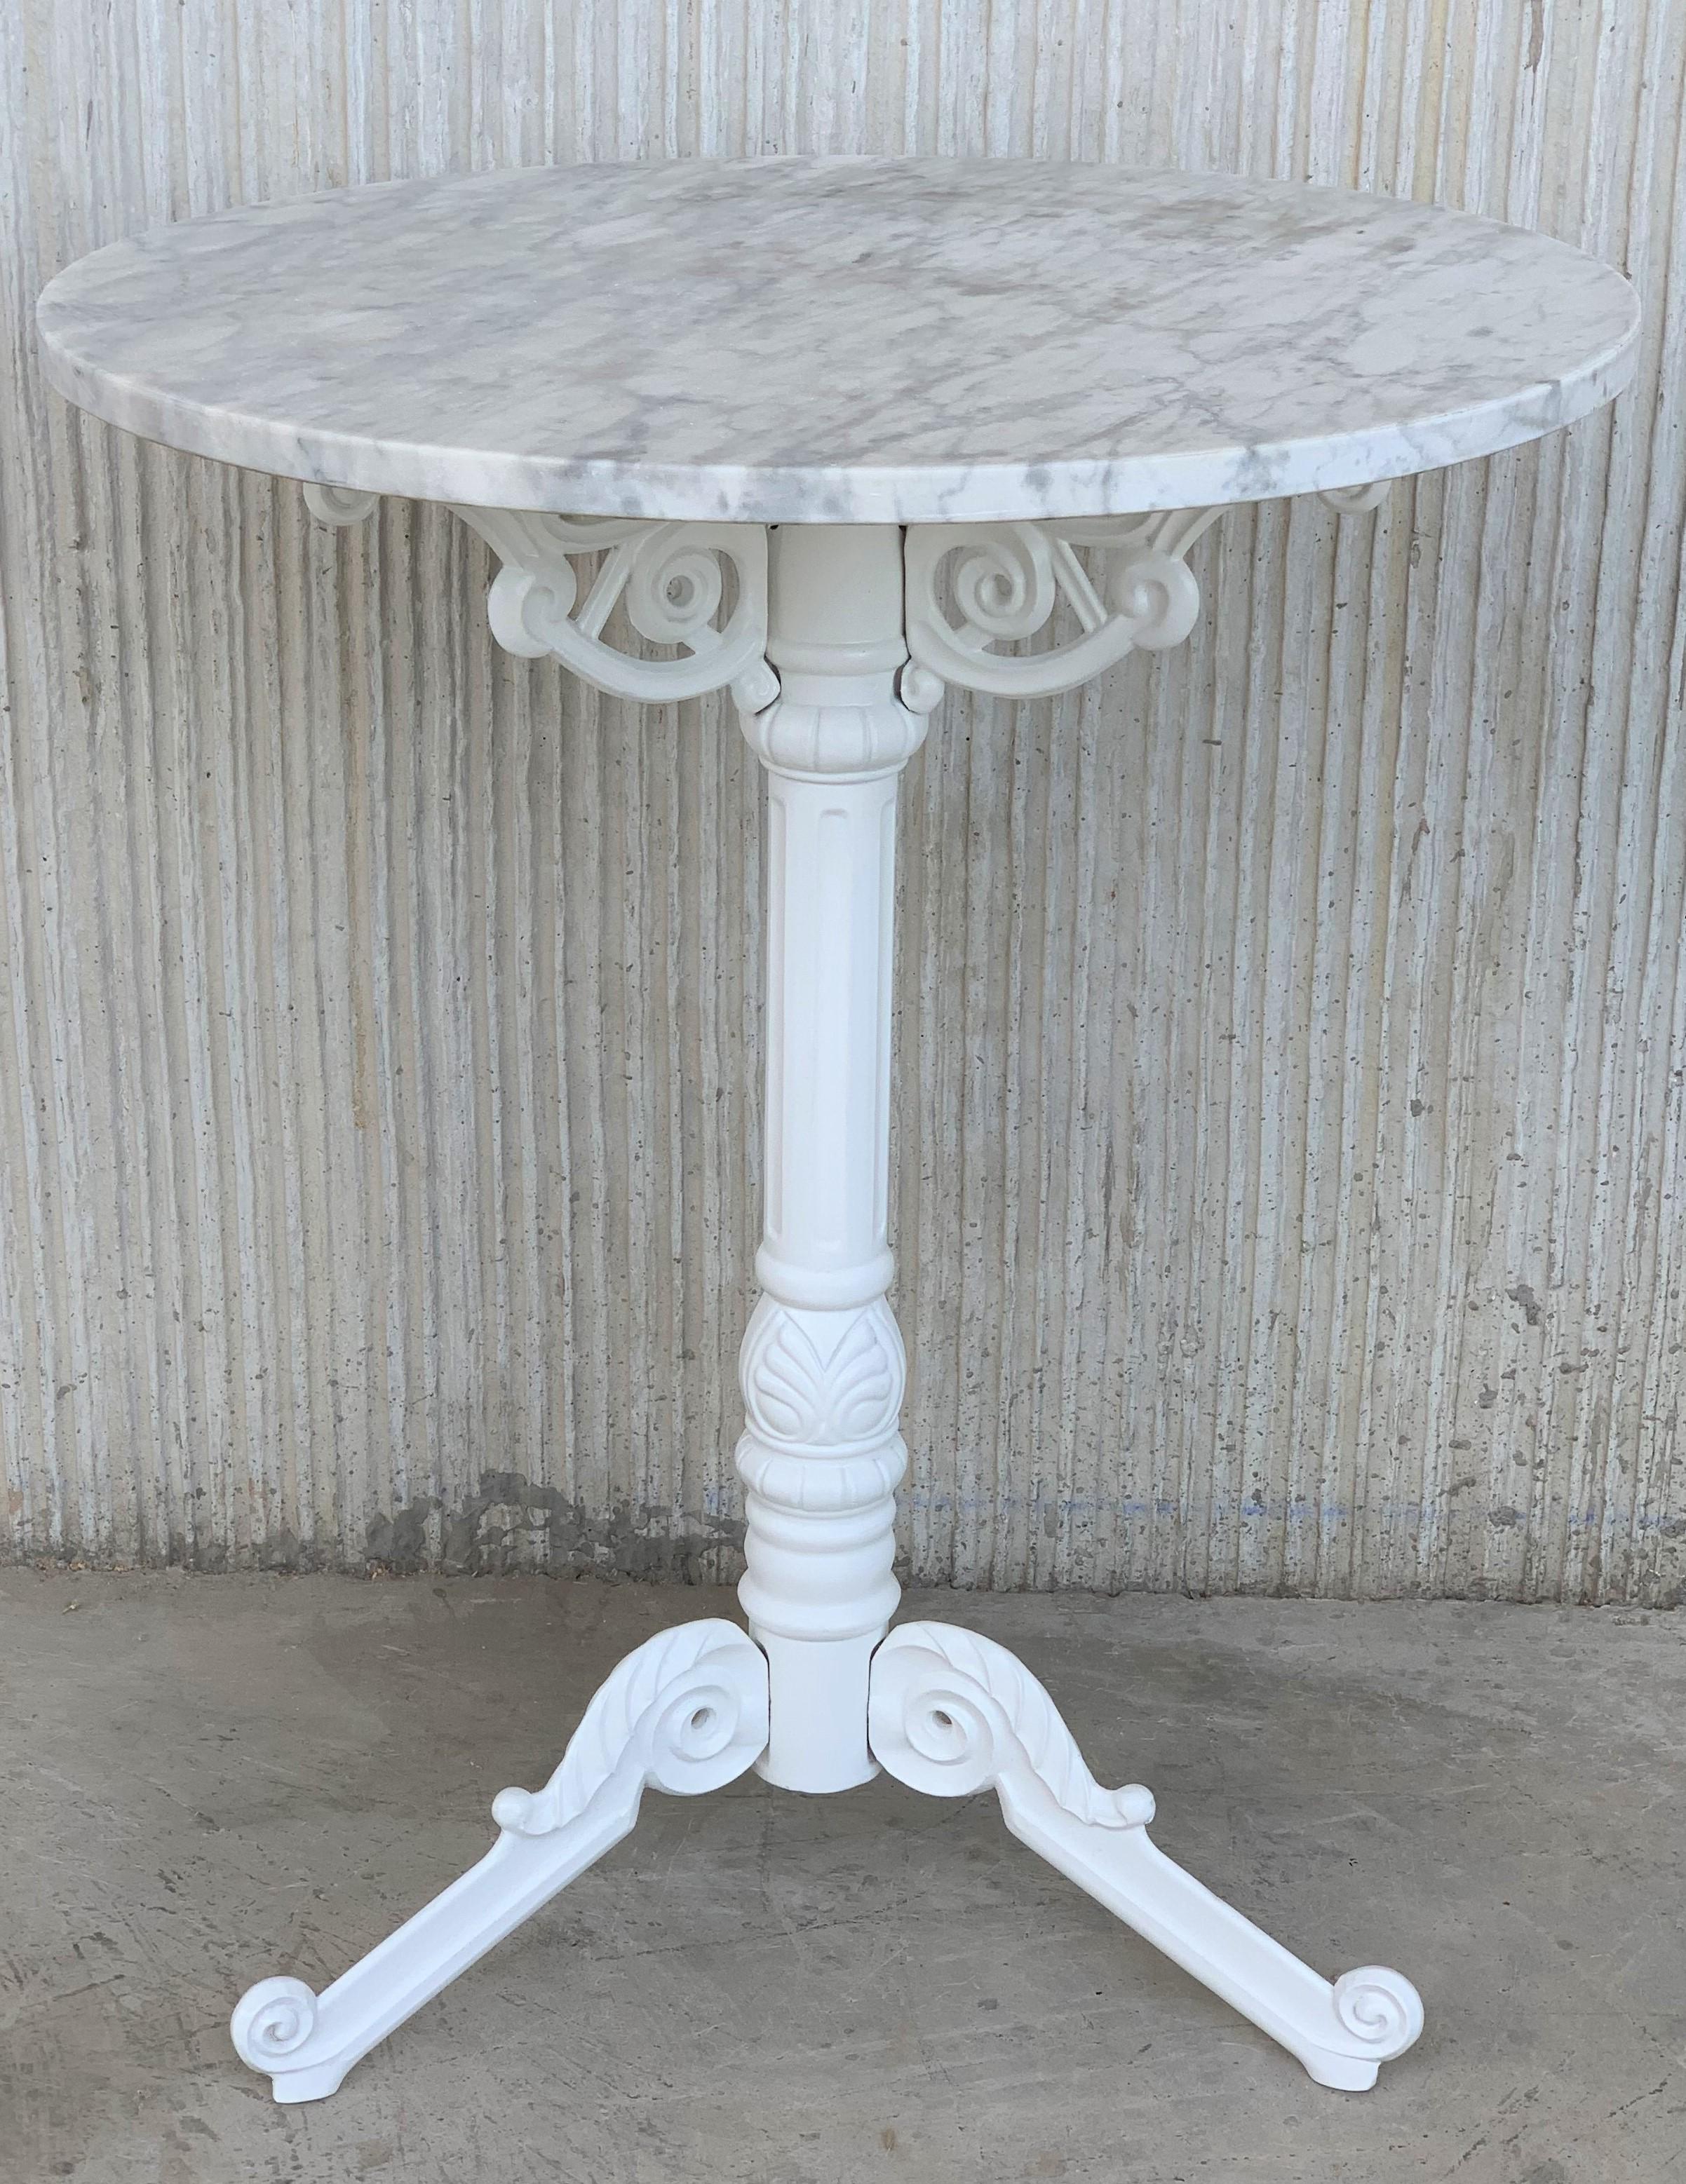 French style cast iron base with marble top garden table or bistro table.

Finely detailed cast iron base with white marble top.

Indoor and outdoor.